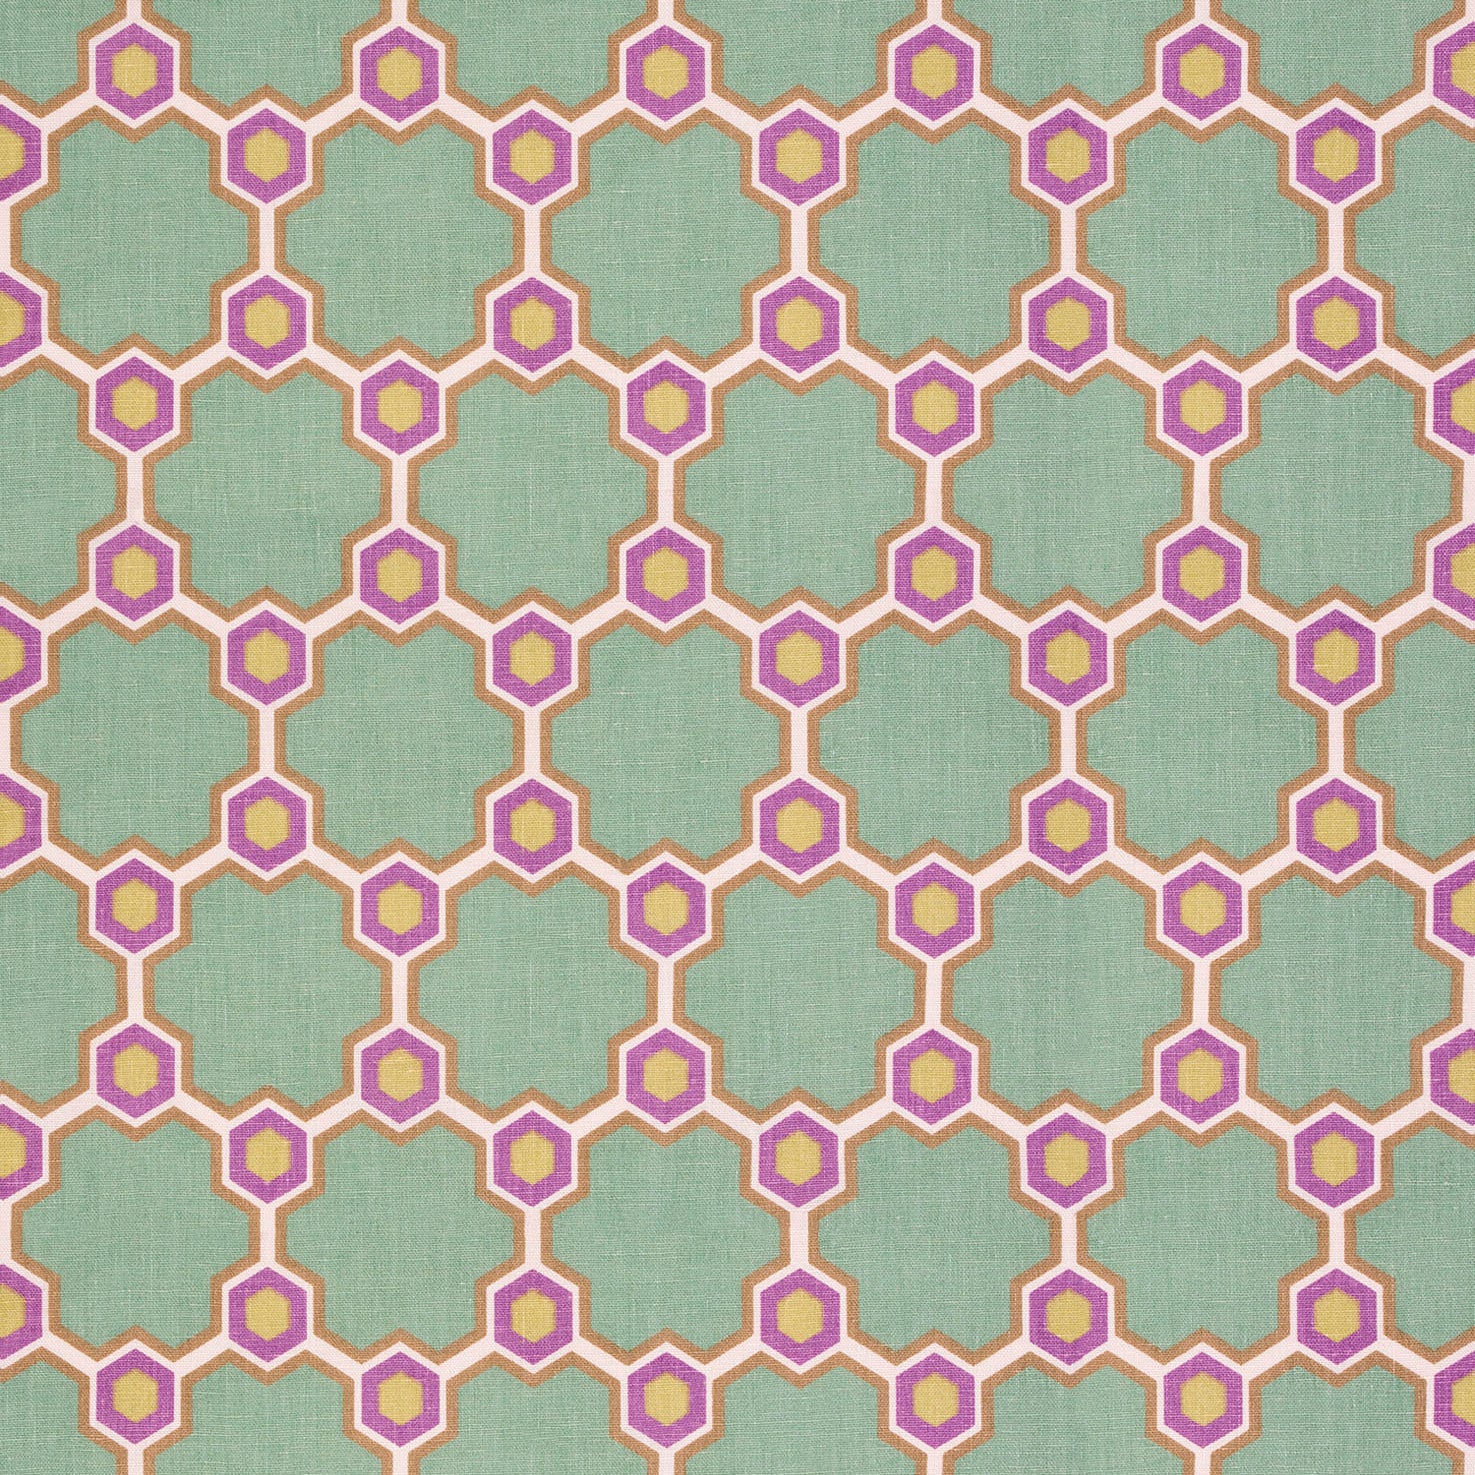 Detail of fabric in a geometric honeycomb pattern in shades of green, purple, white and orange.